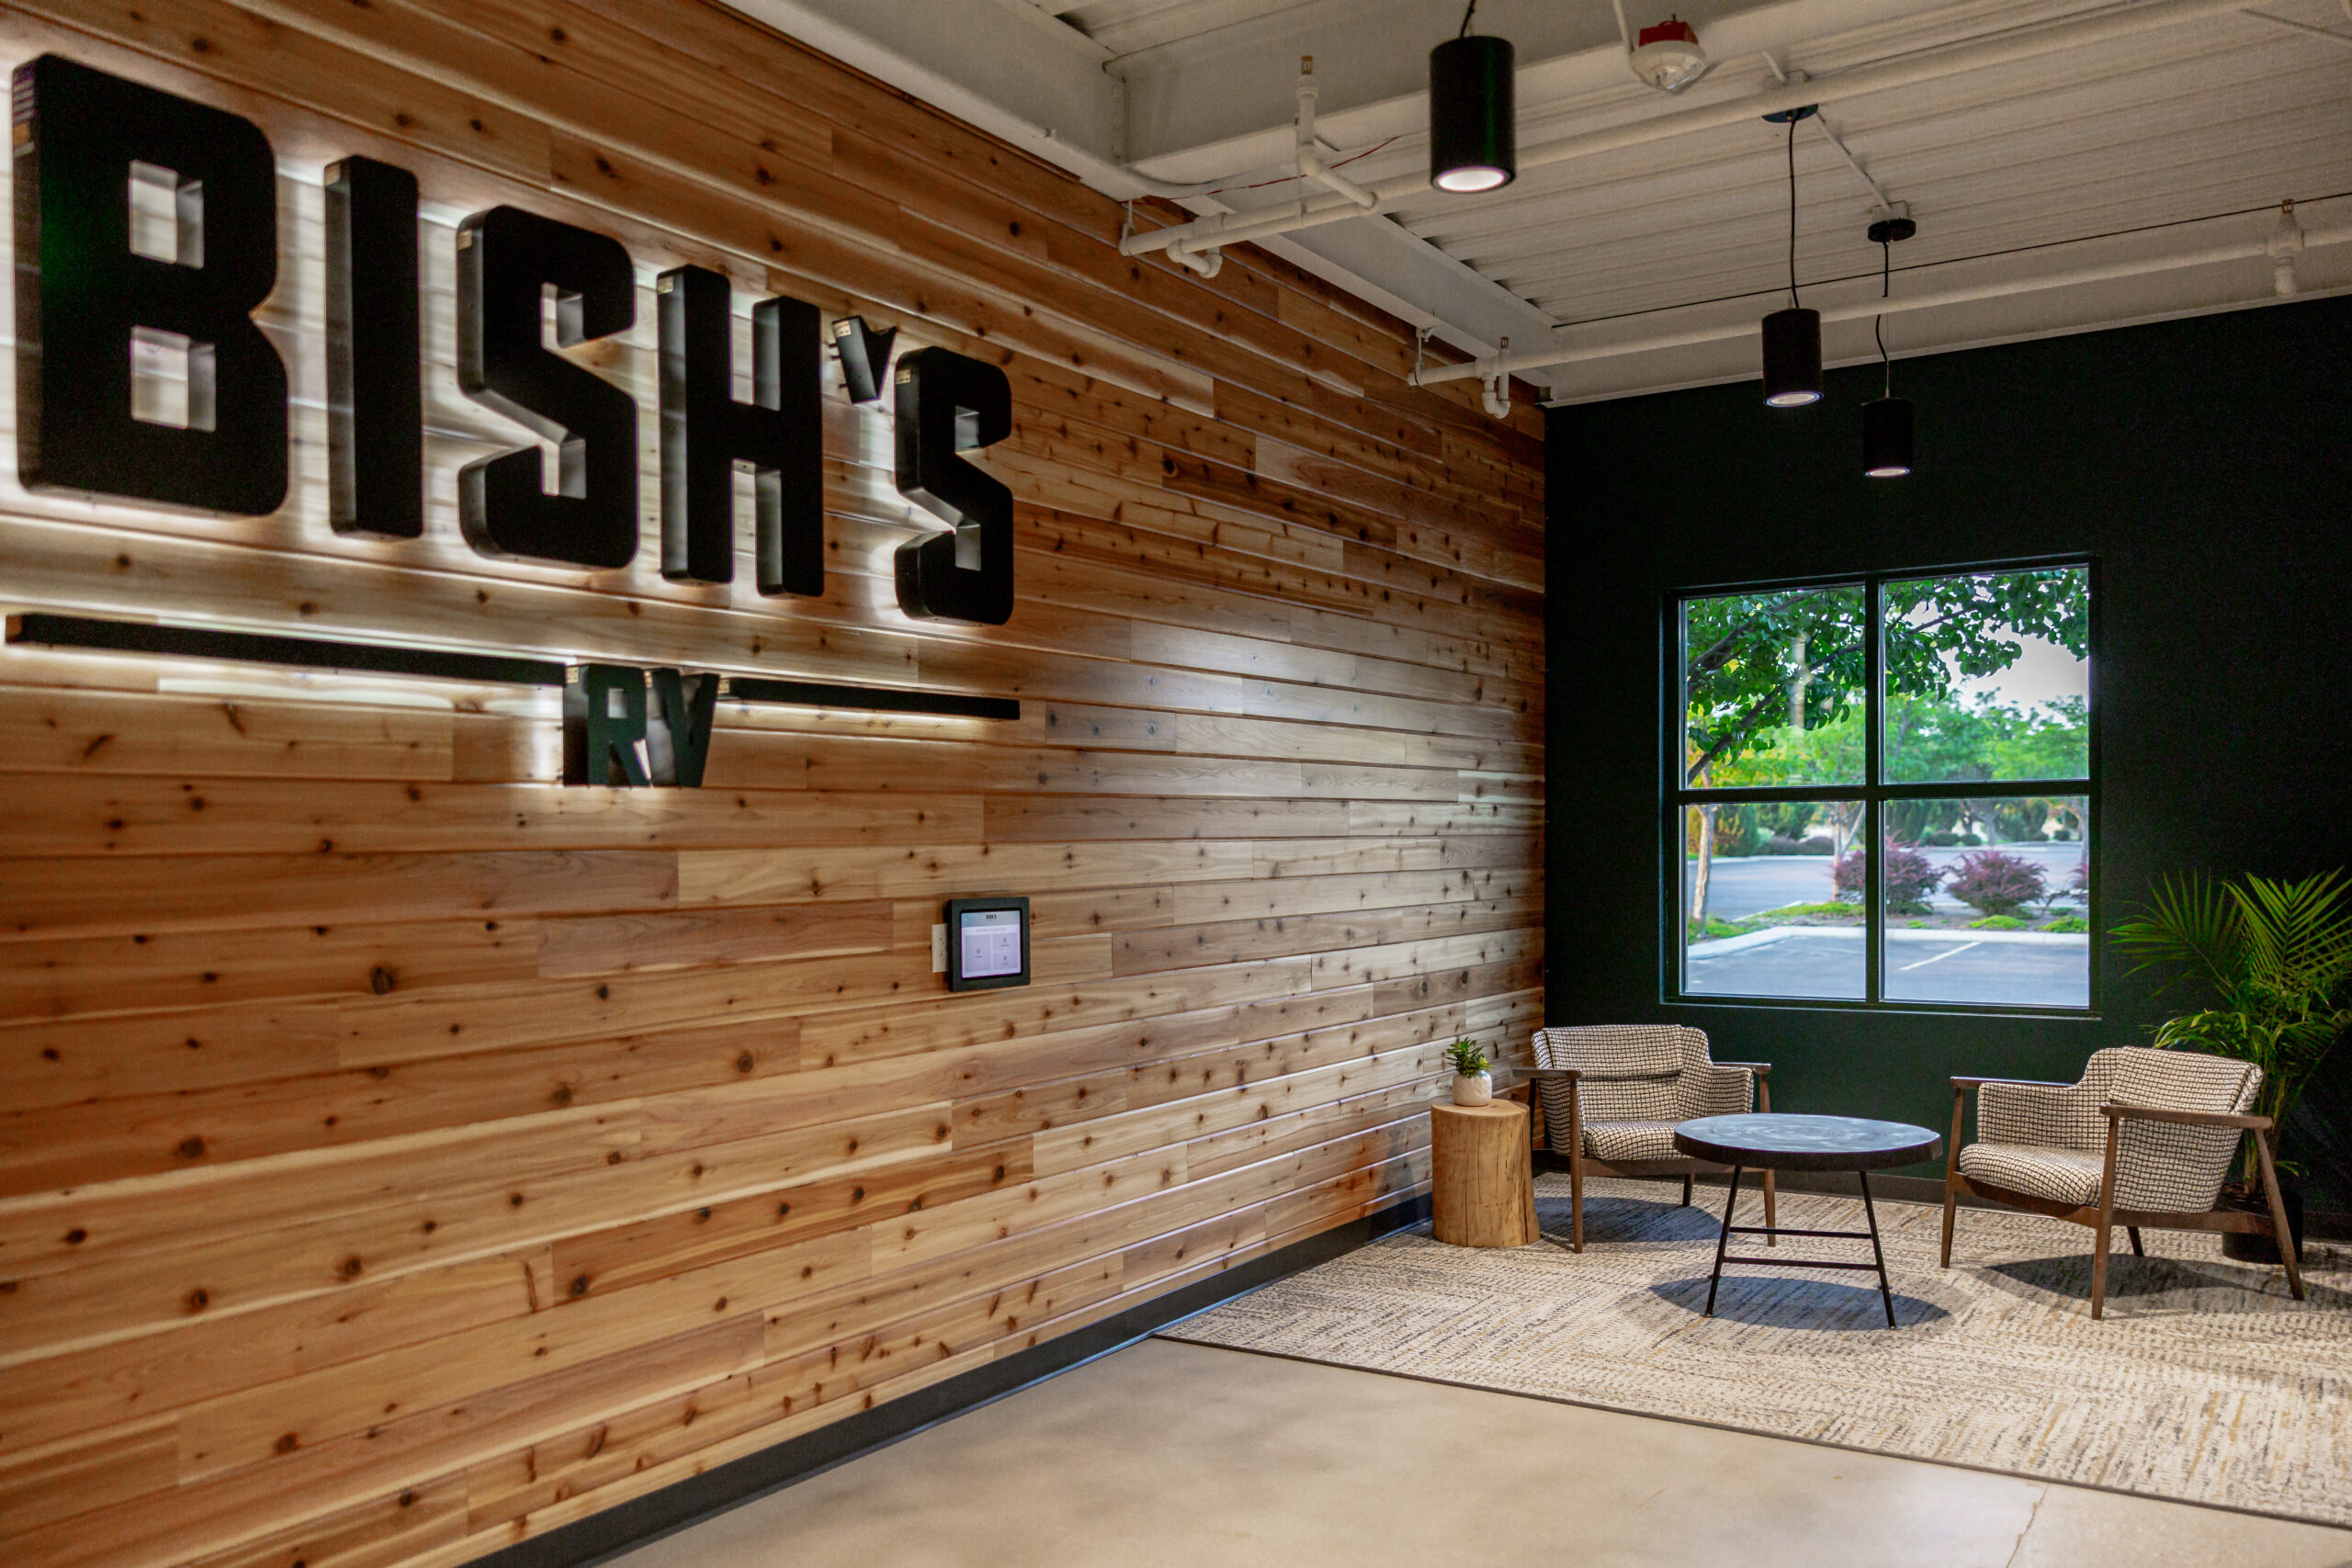 Project Complete: Bish’s RV Corporate Office Renovation